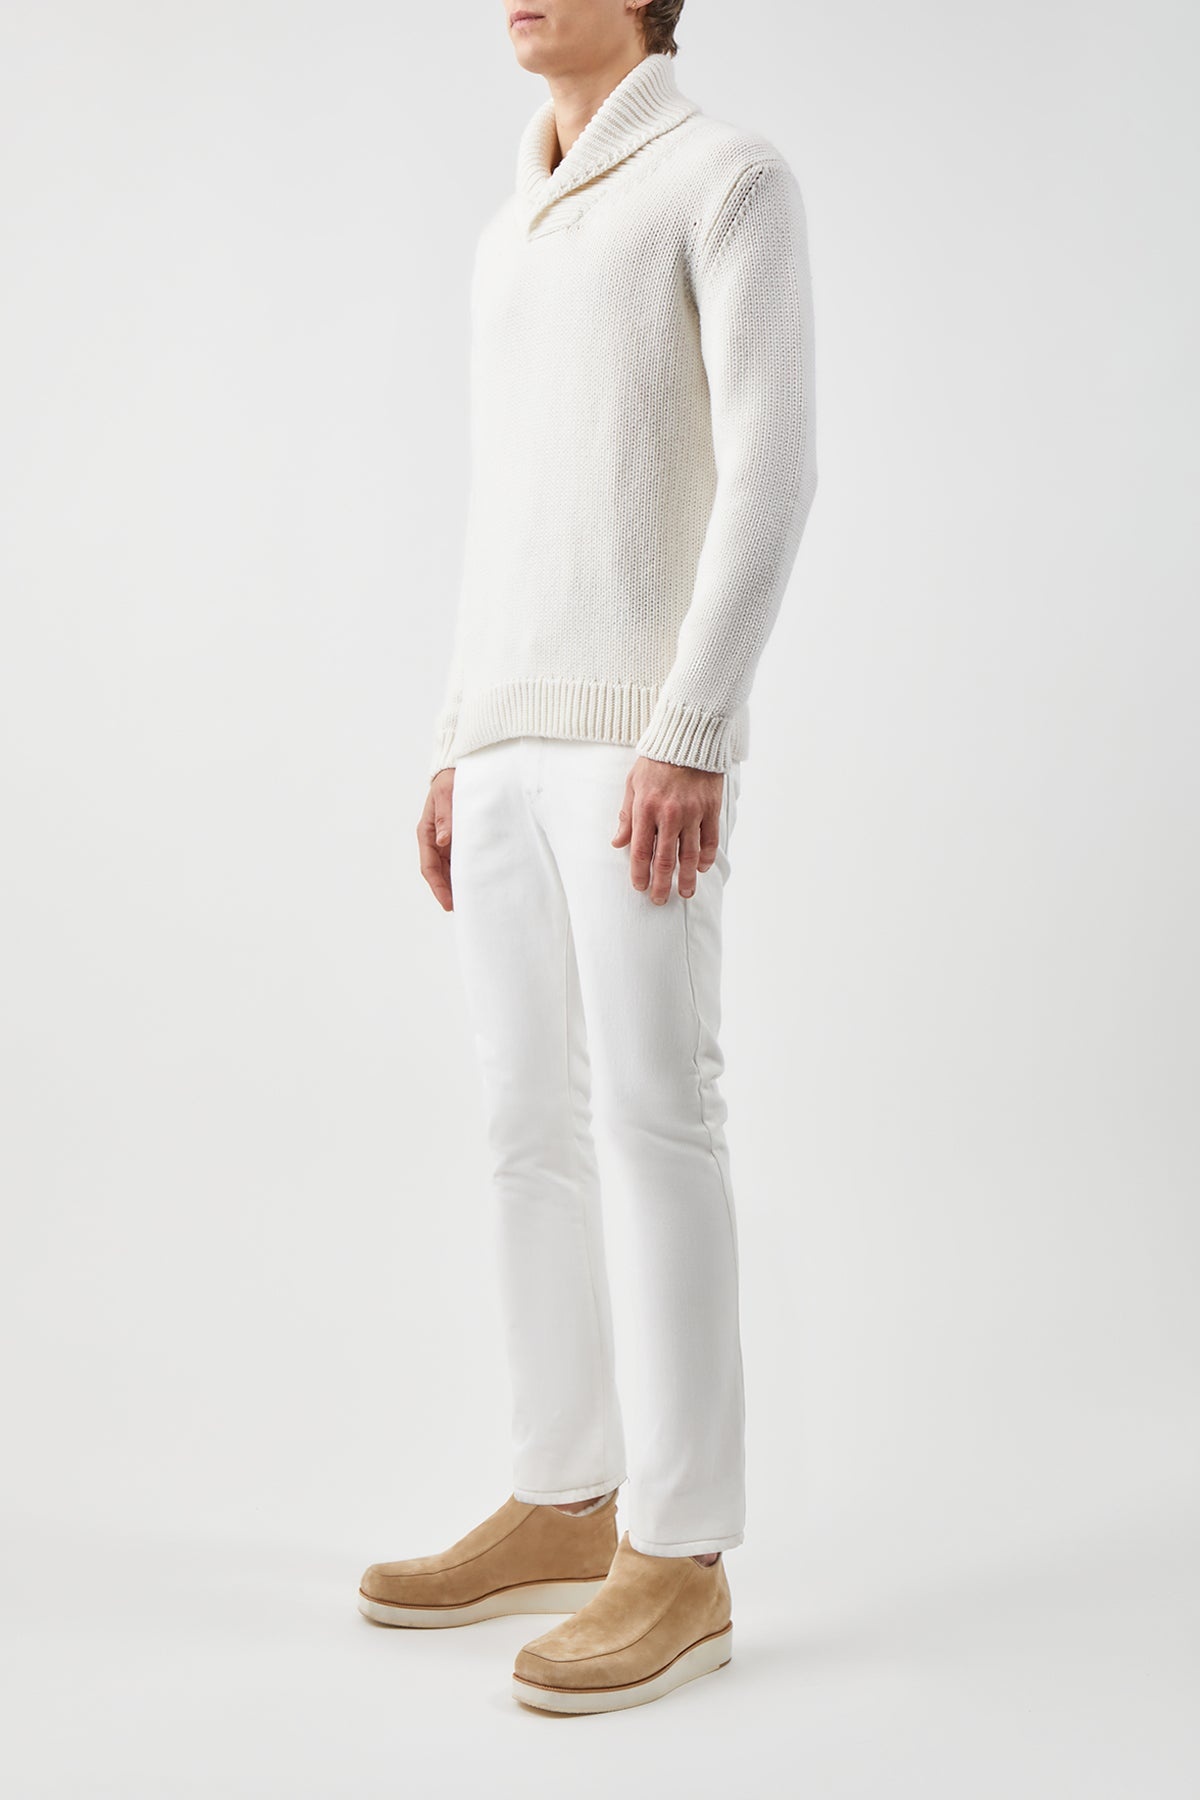 Sal Knit Sweater in Ivory Cashmere - 3